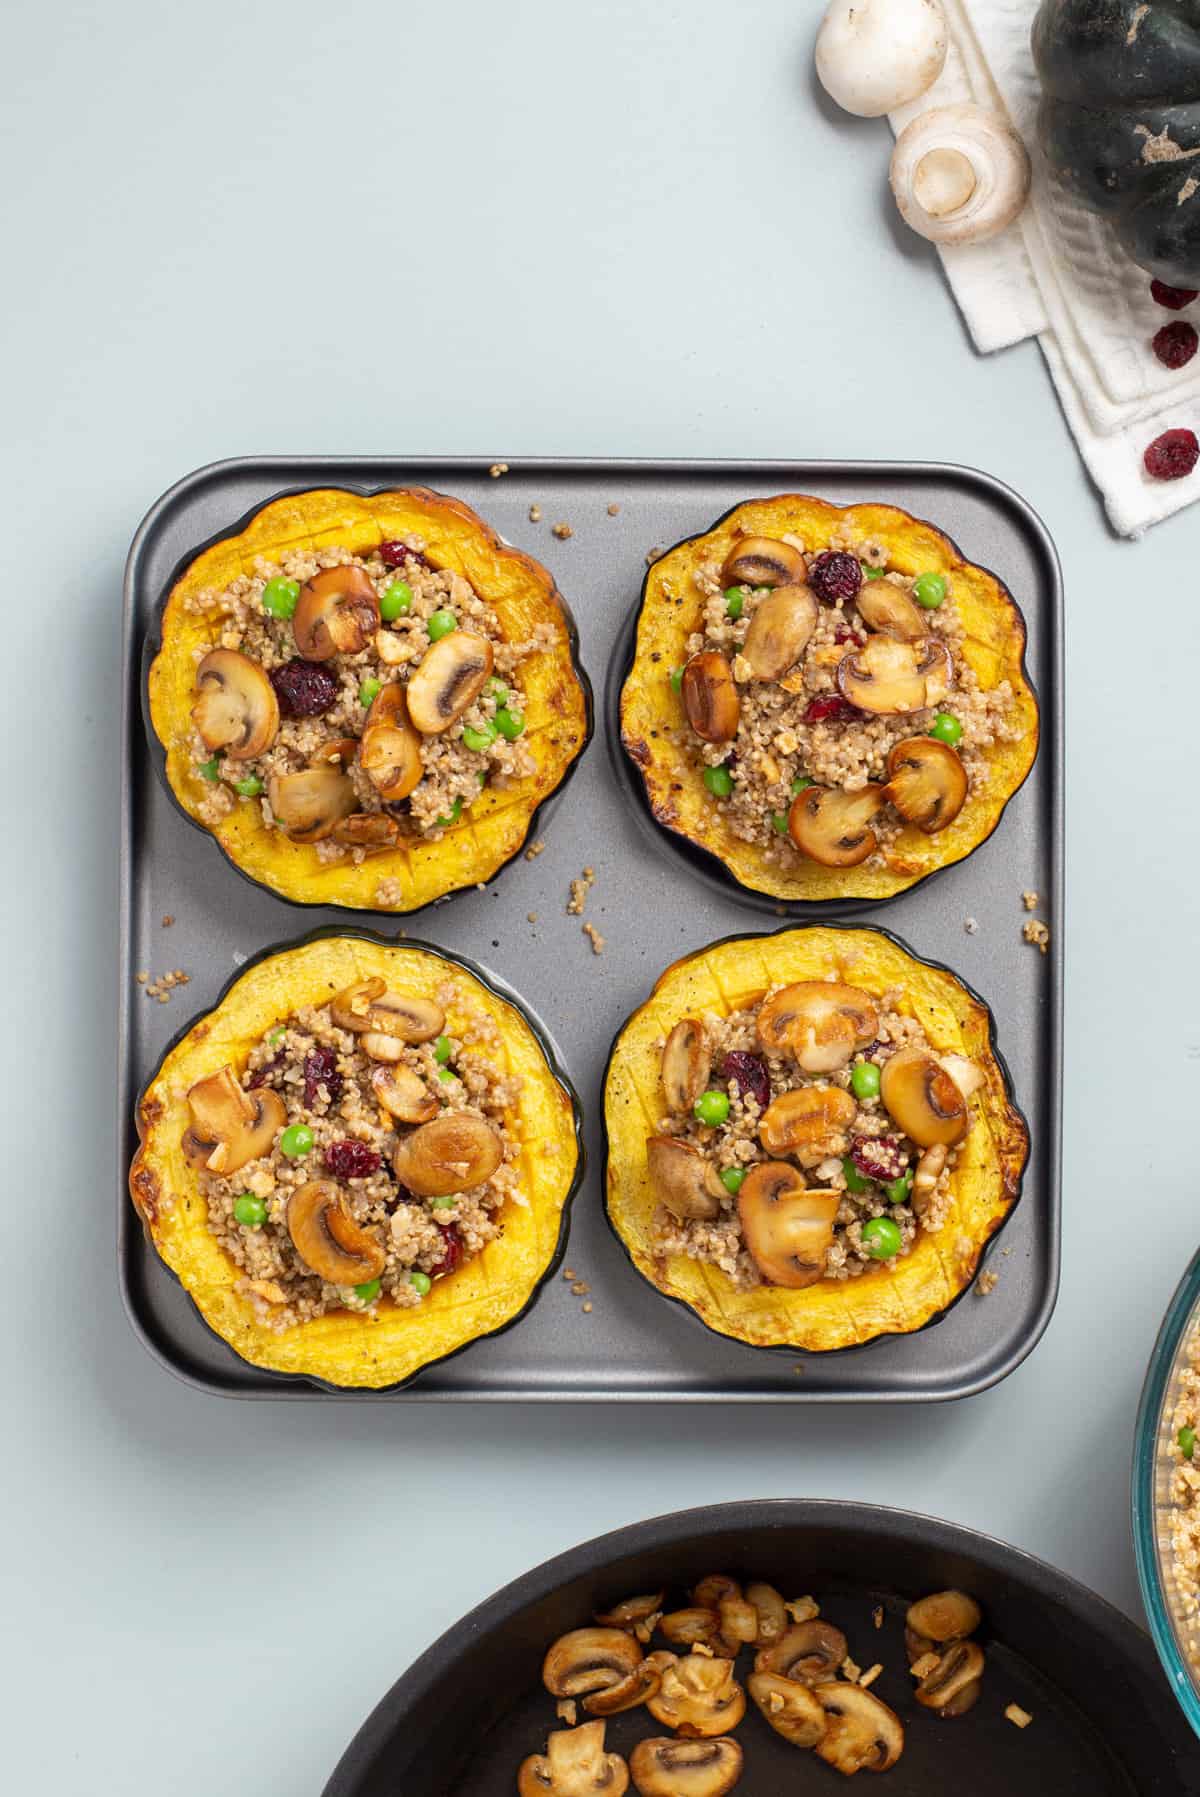 Overhead view of acorn squash halves filled with the quinoa mixture.